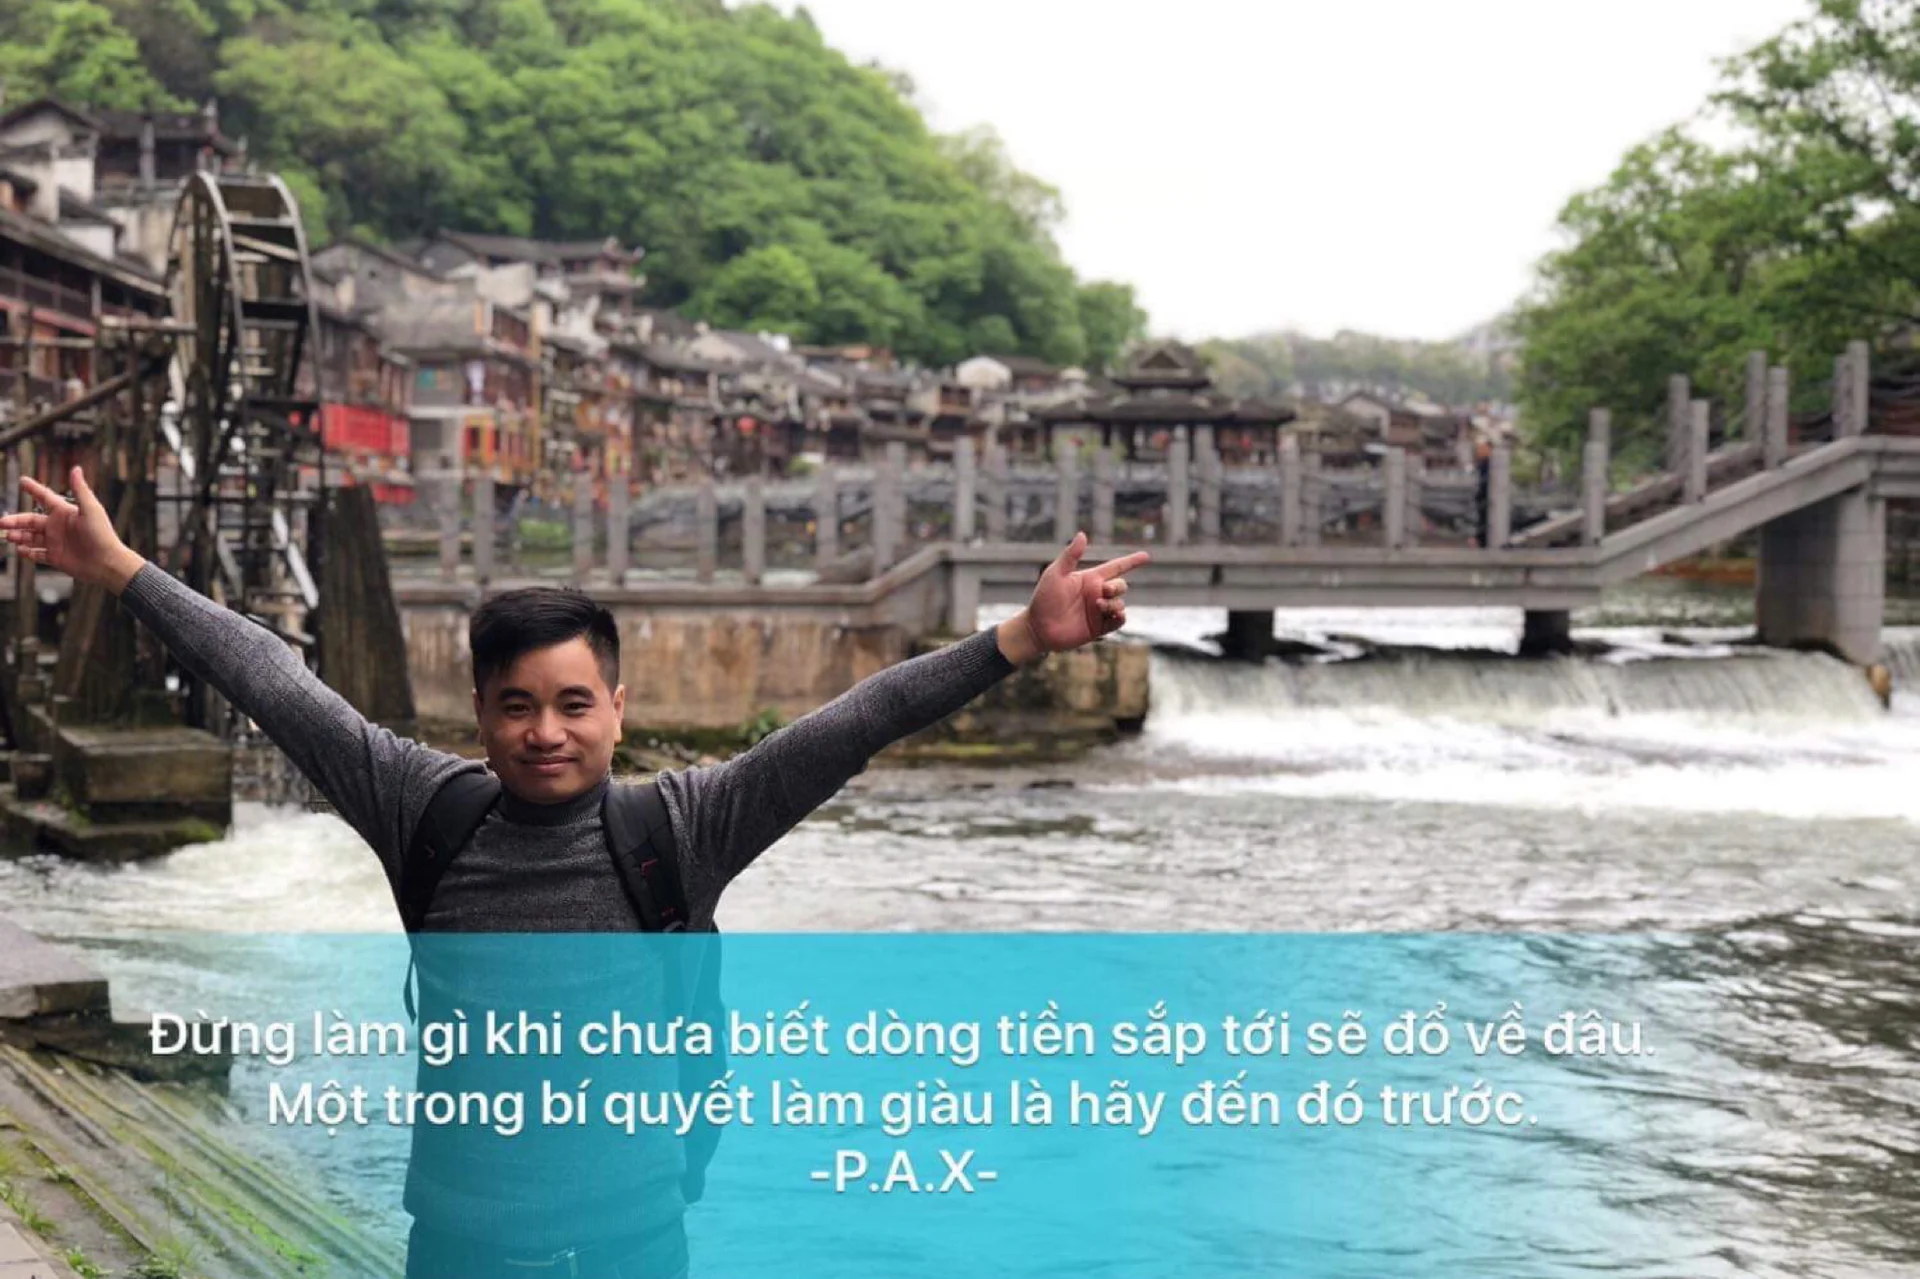 Xuan Pham Anh's cover photo